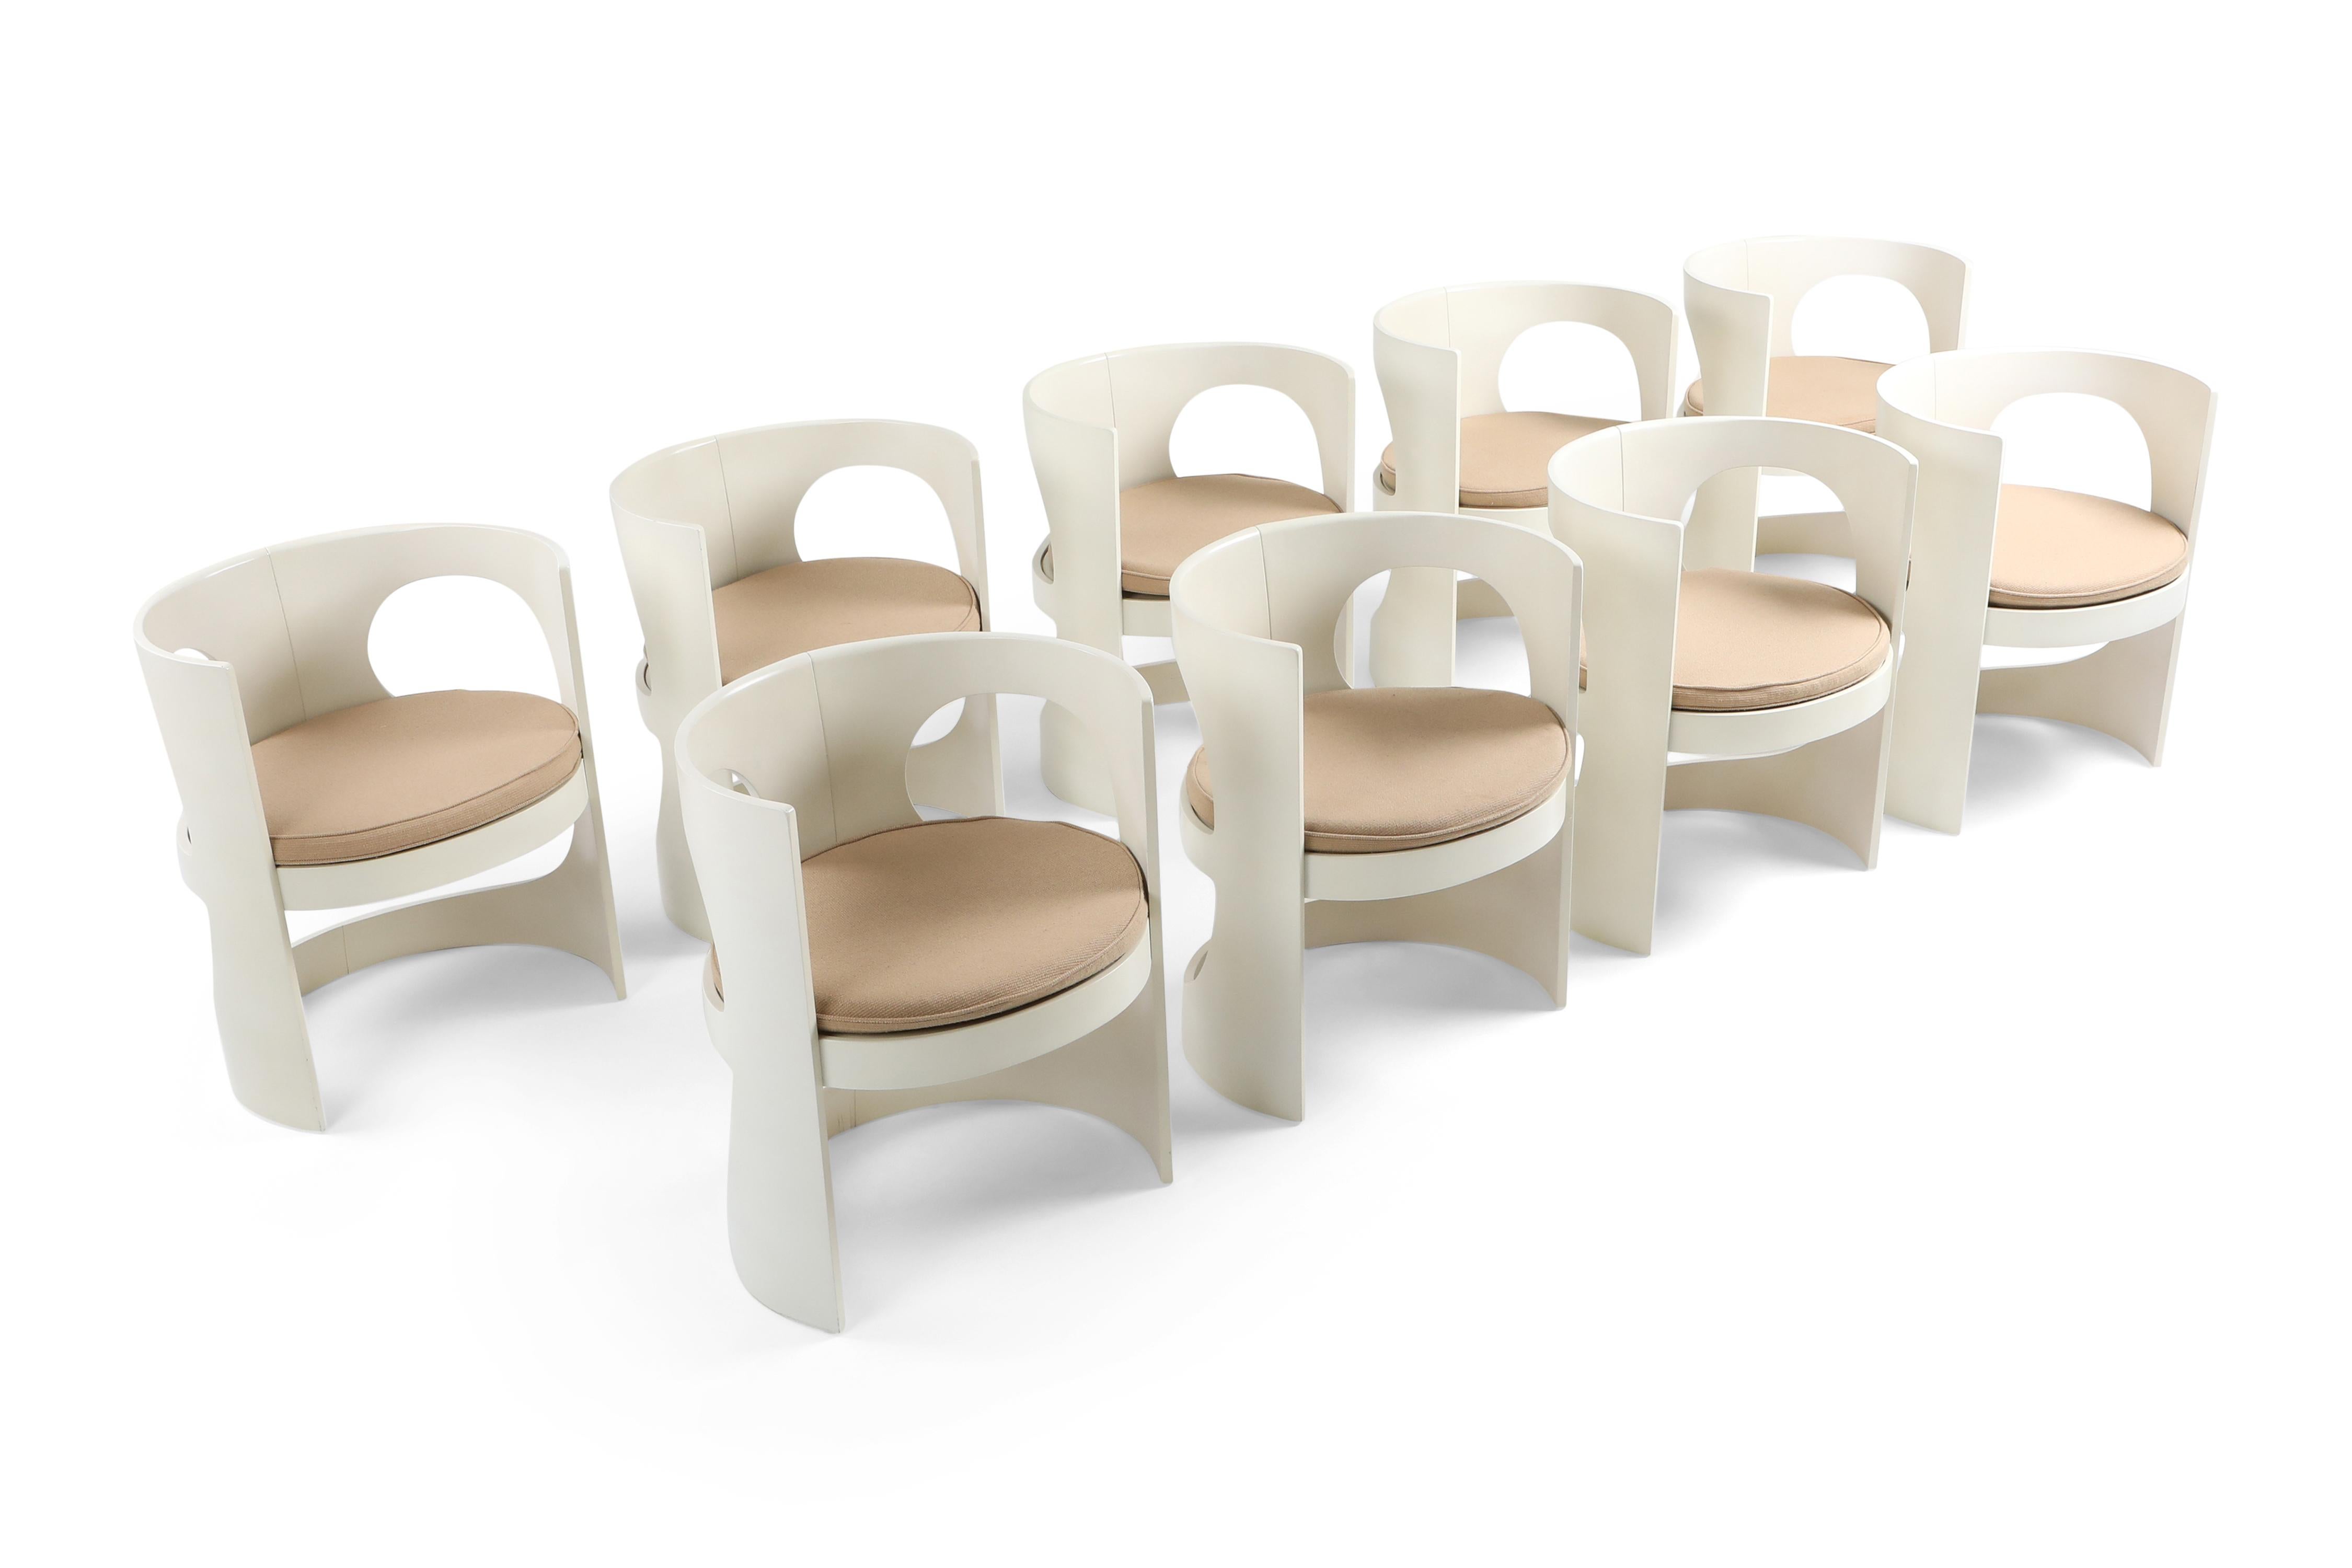 Space Age pre pop armchairs designed by Arne Jacobsen and manufactured by Asko, Finland 1969. 

This Scandinavian Mid-Century Modern set of nine chairs is extremely rare. The chairs are in off white lacquered plywood and have off white newly